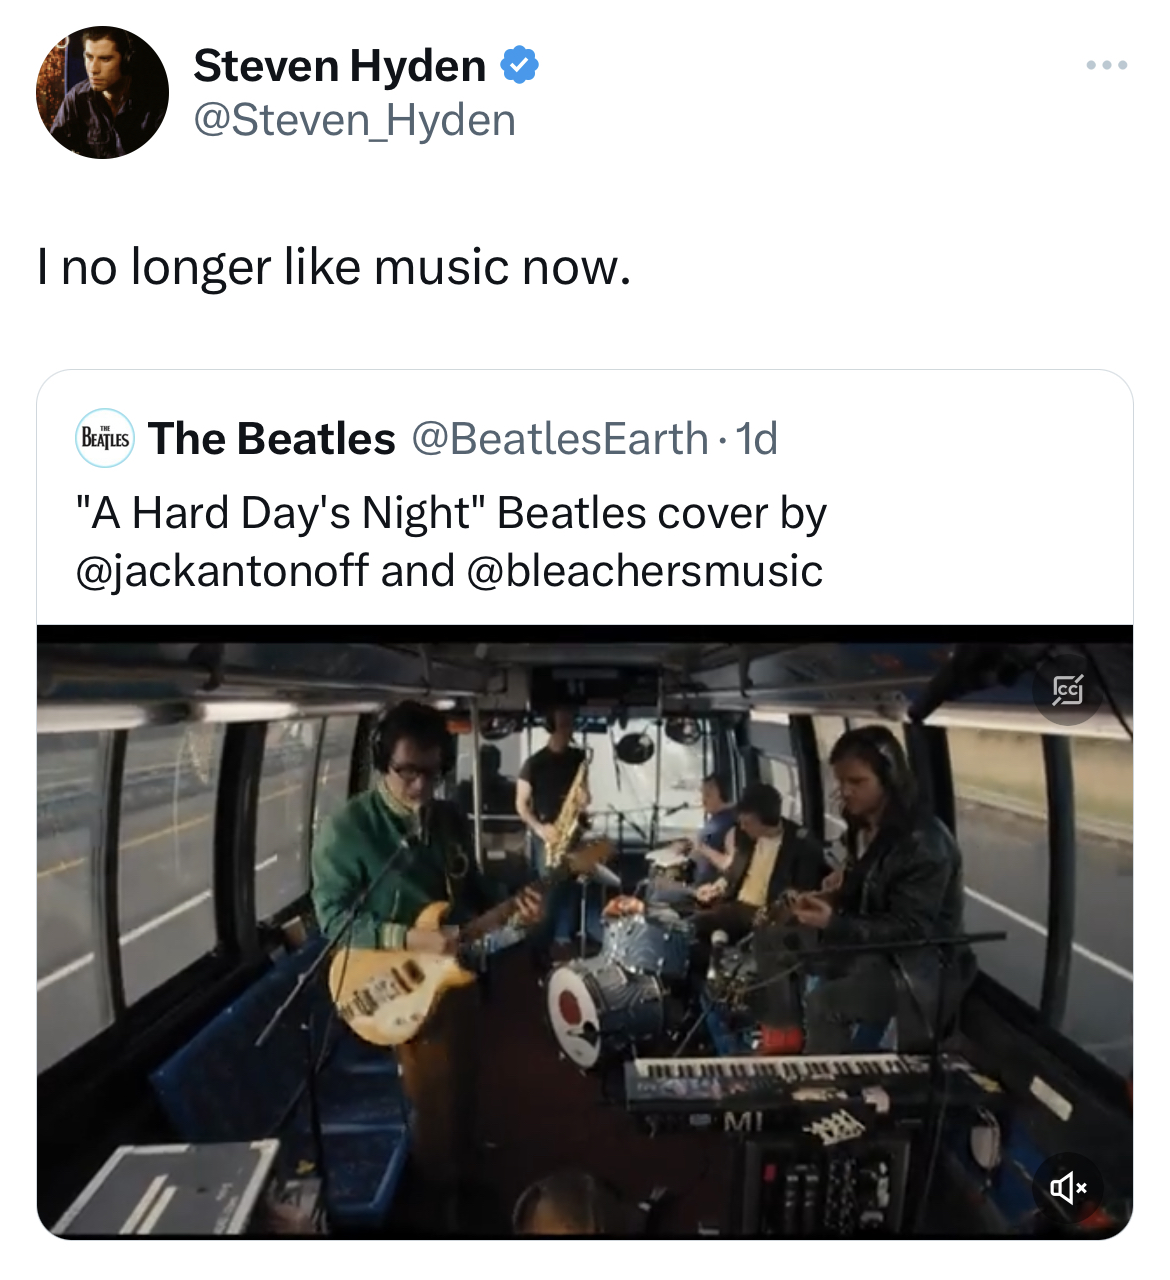 Tweets dunking on celebs - vehicle - Steven Hyden I no longer music now. Bors The Beatles "A Hard Day's Night" Beatles cover by and Jk.38.Jikal 15.204.38 Mong Mi A